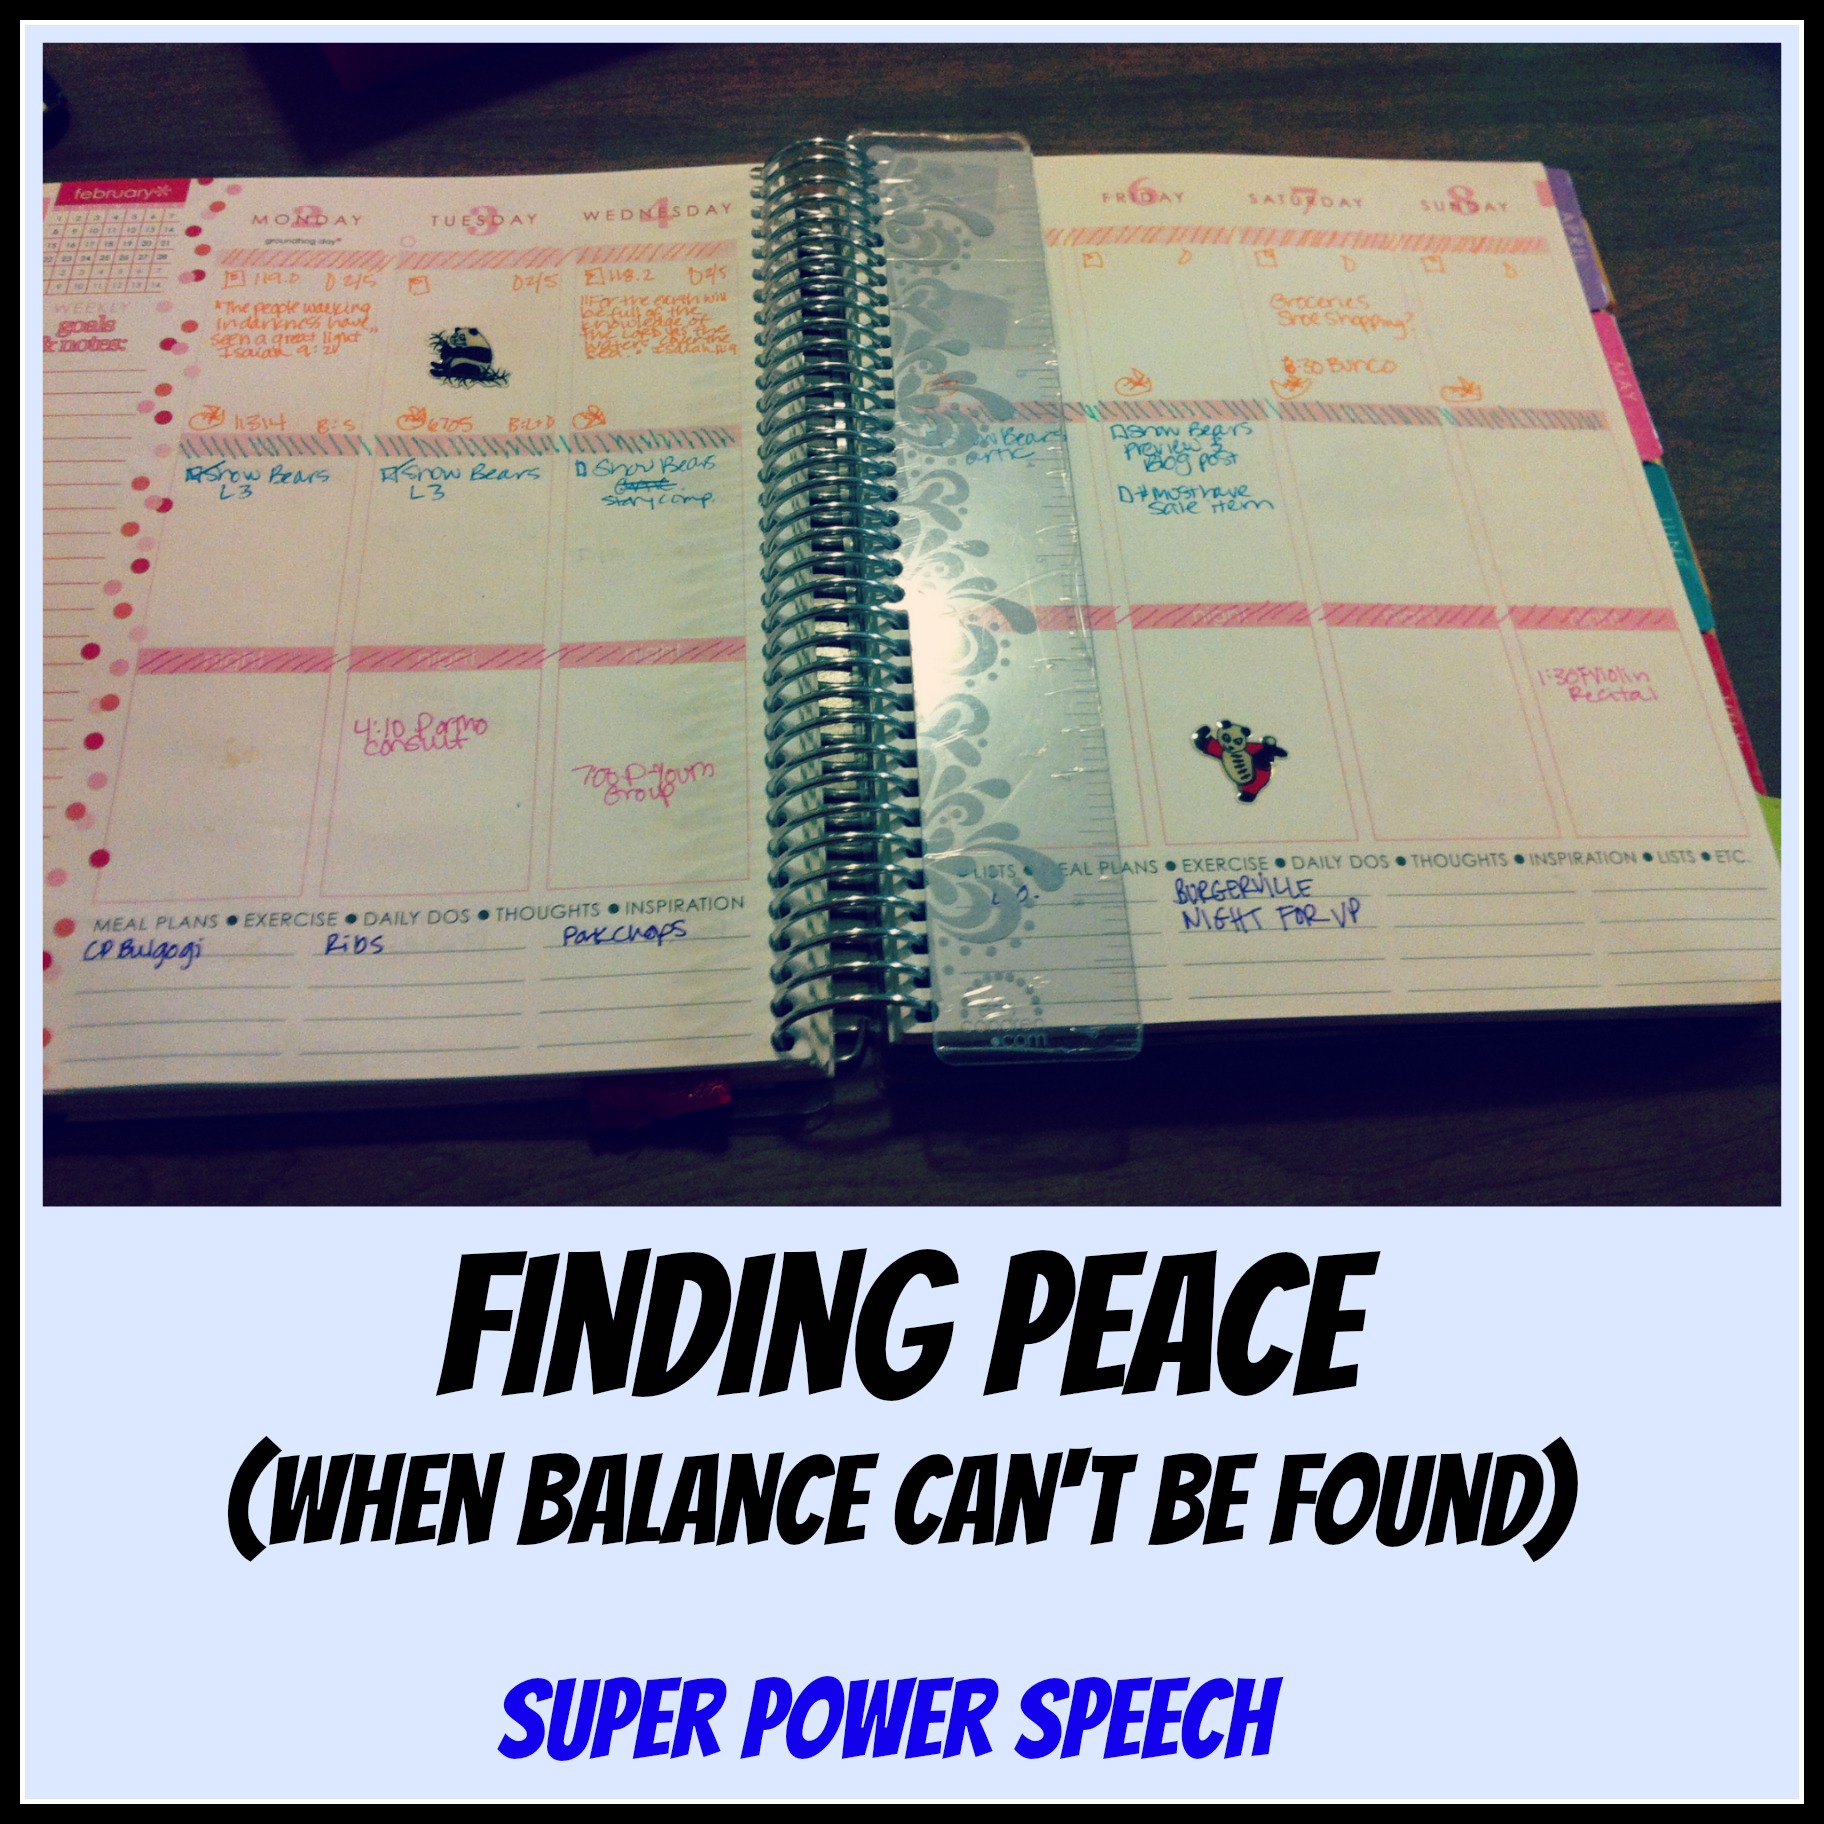 Finding peace (when balance can’t be found)